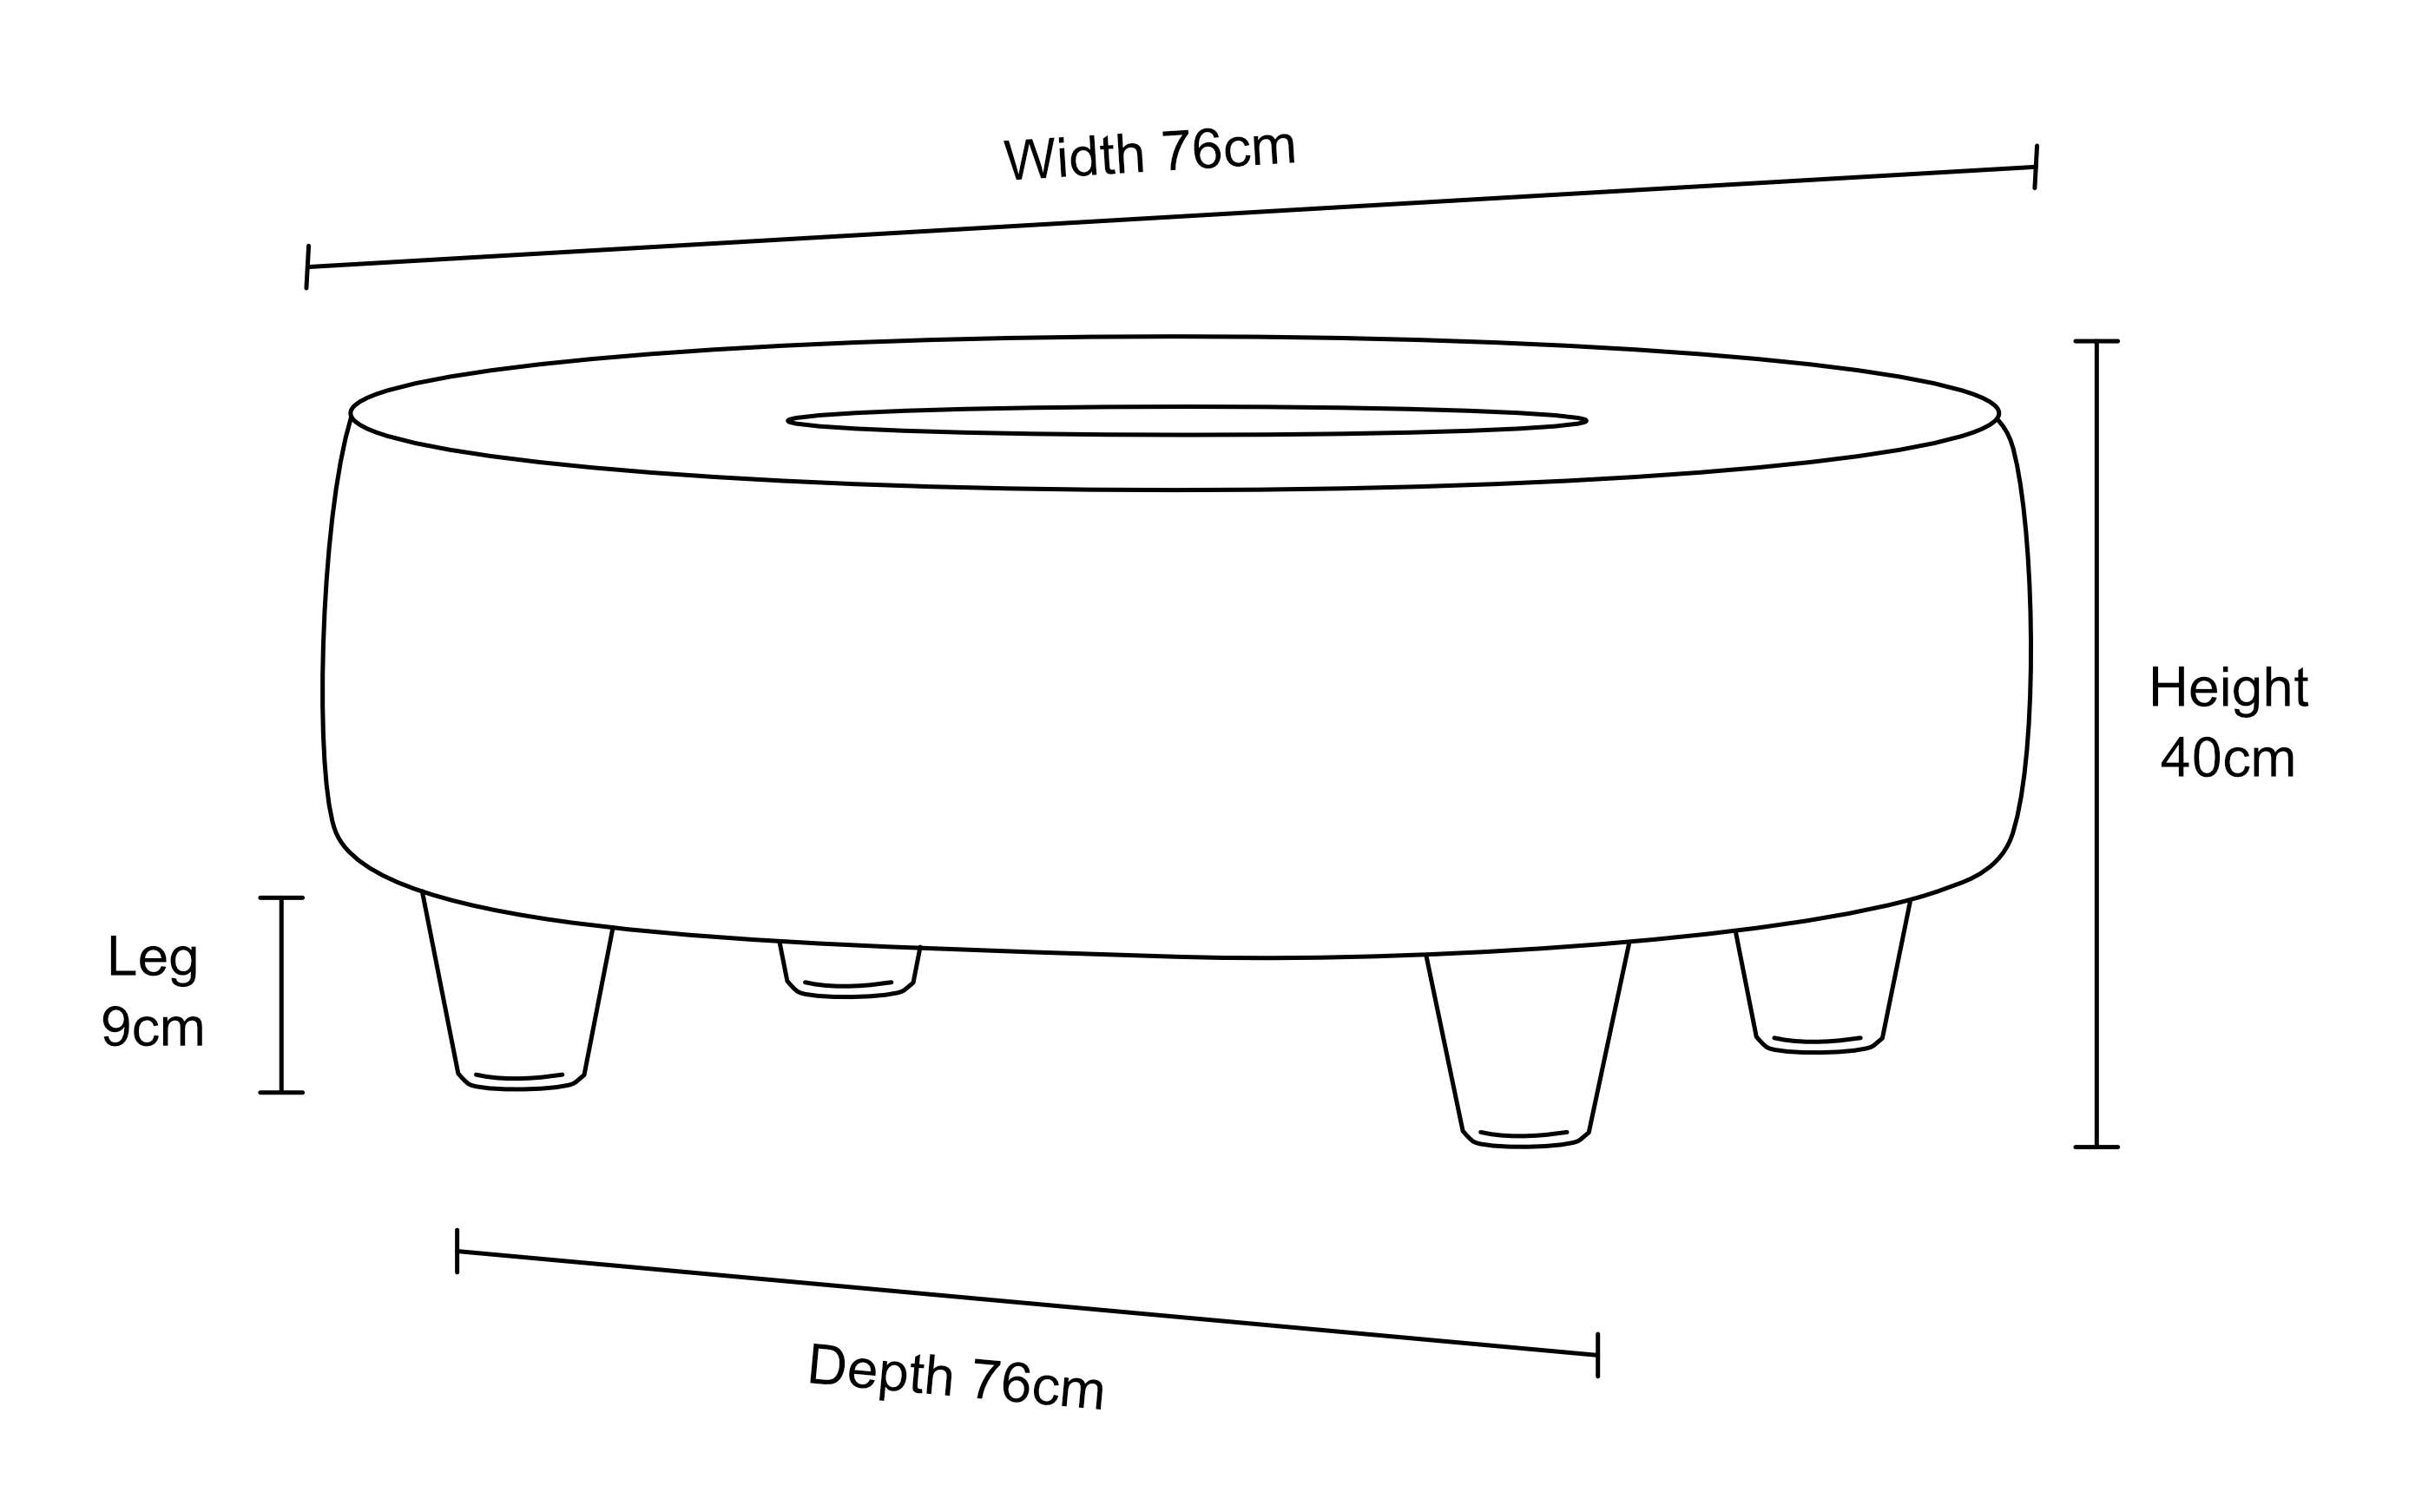 https://www.footstools.co.uk/wp-content/uploads/round-footstool-30x30-dimensions-1.jpg